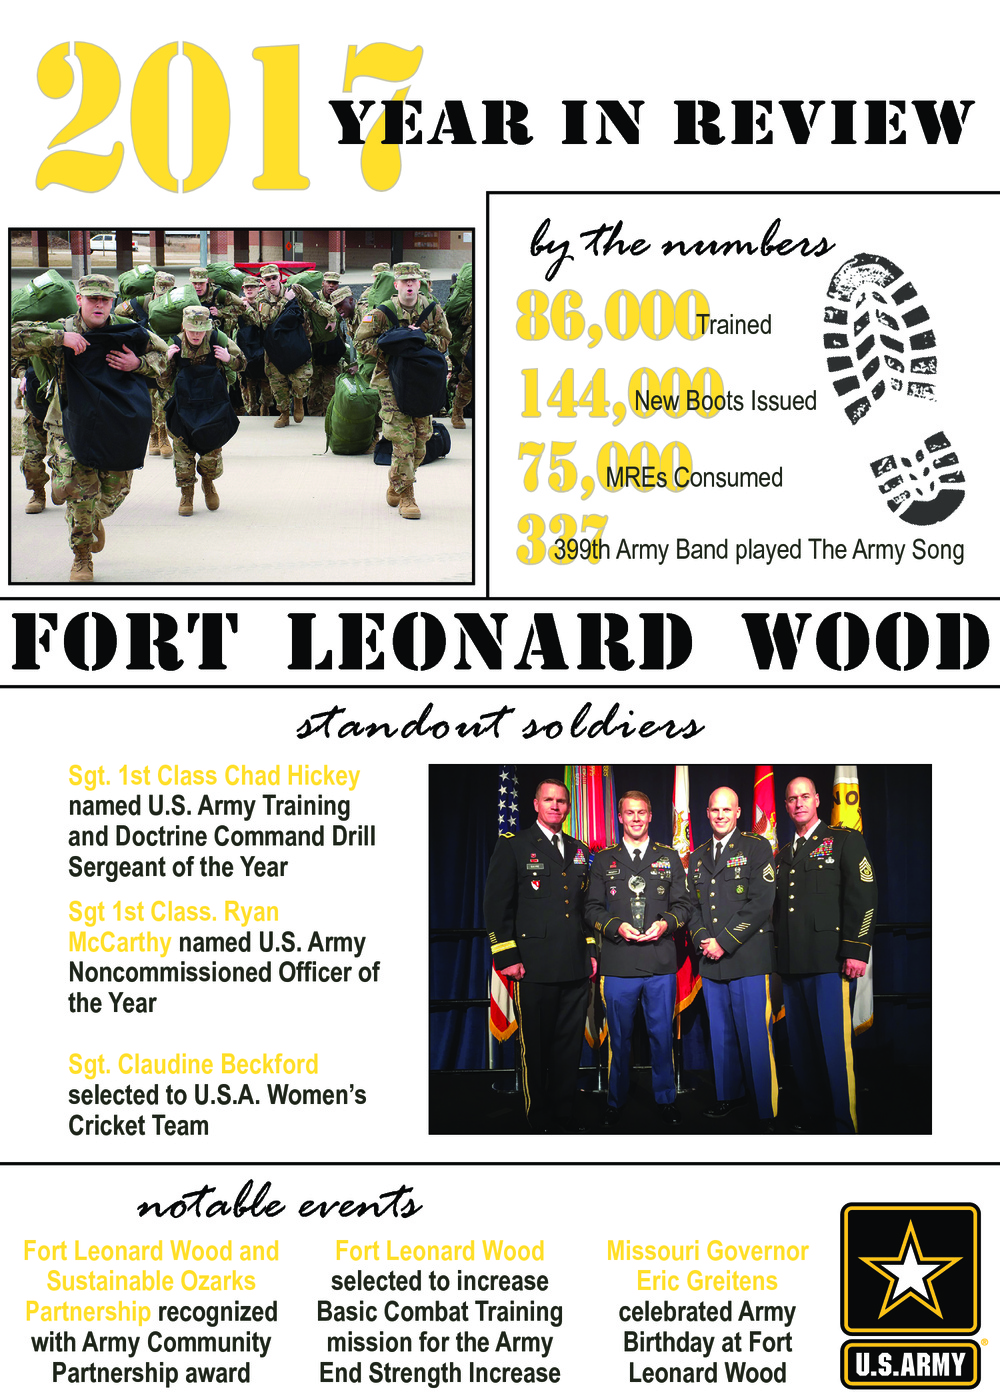 Fort Leonard Wood 2017 Year in Review